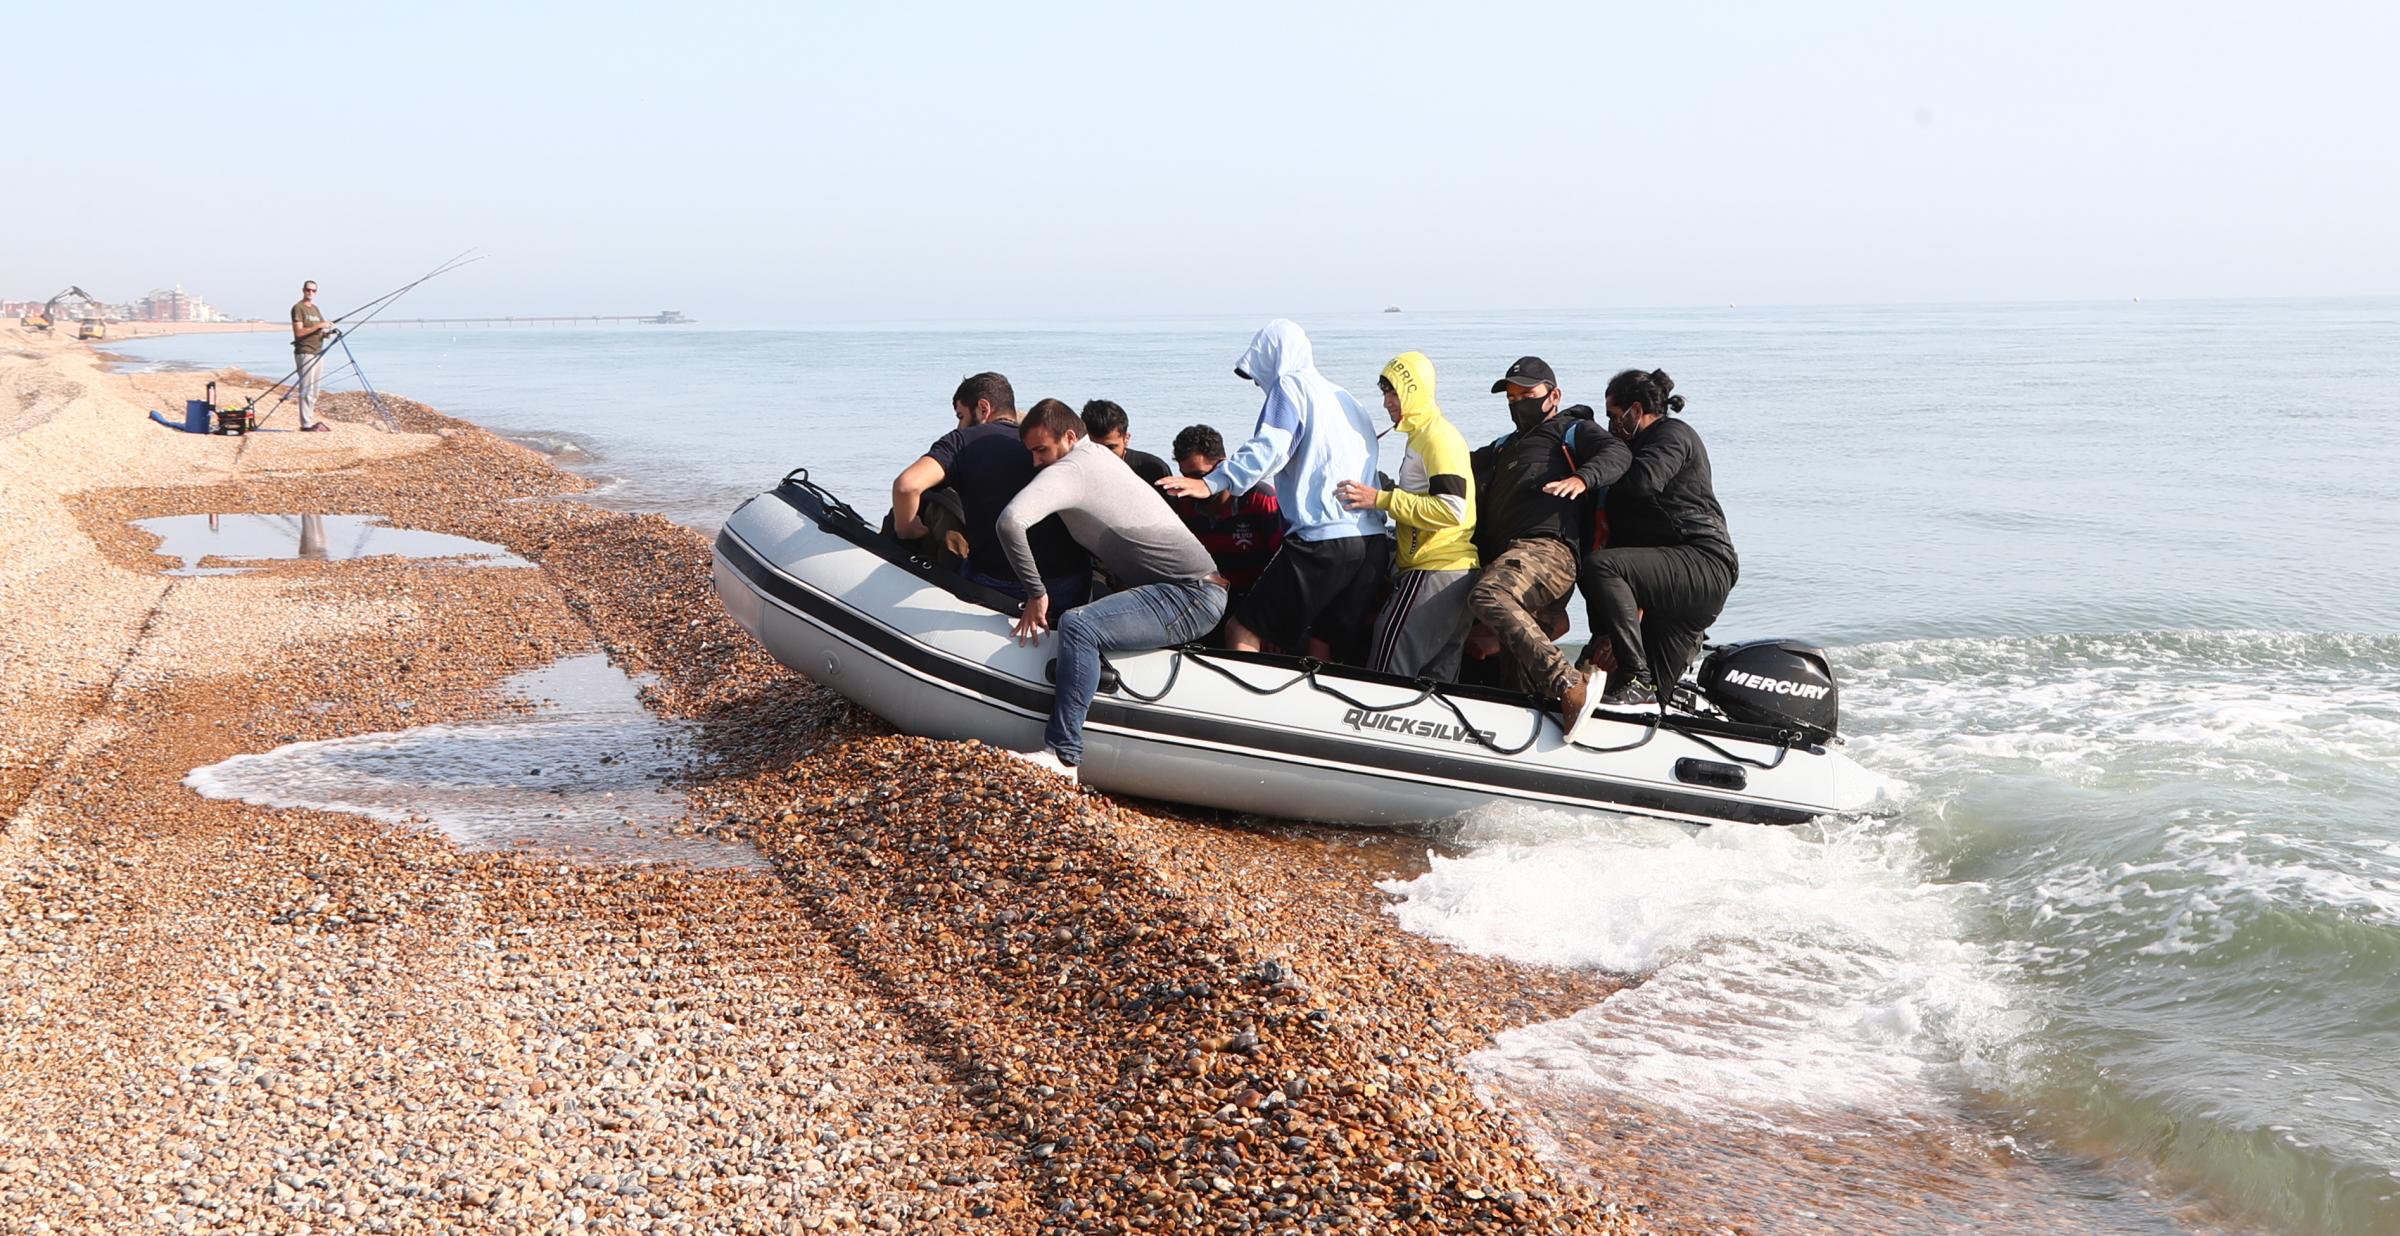 A group of people thought to be migrants arrive in an inflatable boat on a beach near Dover after crossing the Channel.